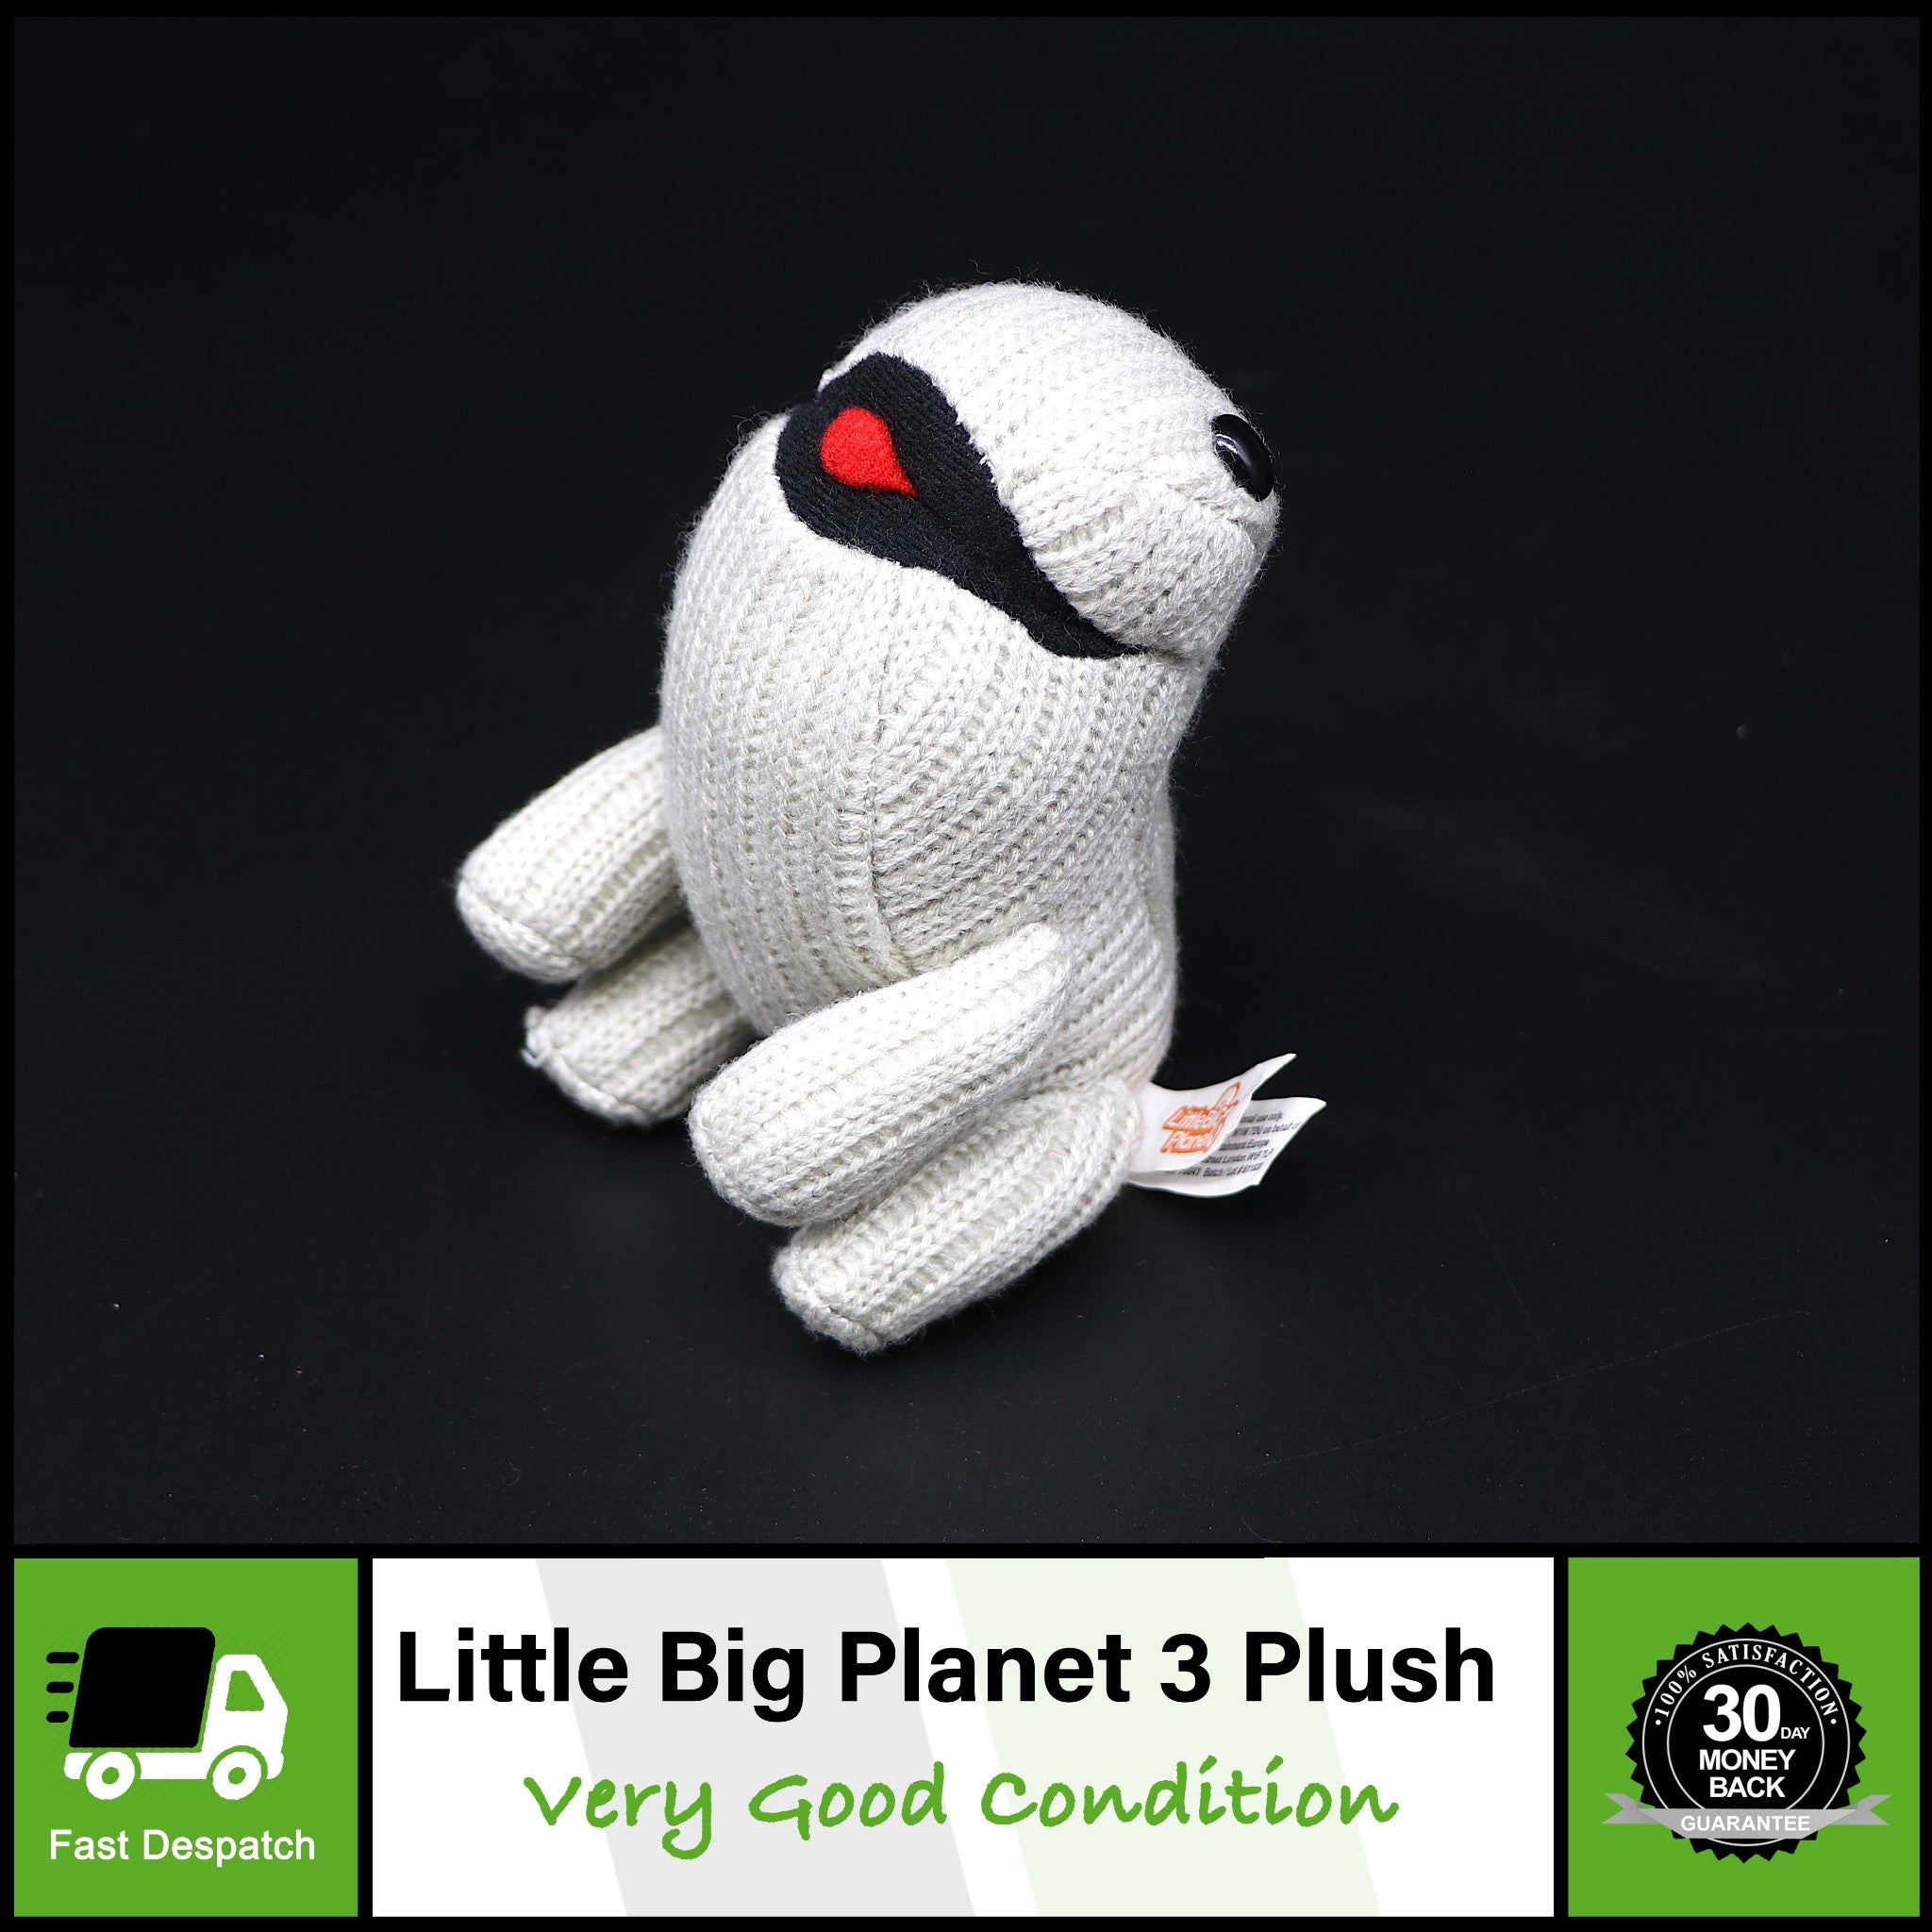 LittleBigPlanet 3 | PS4 Game Promo Oddsock Plush Toy | Official Rare Merchandise